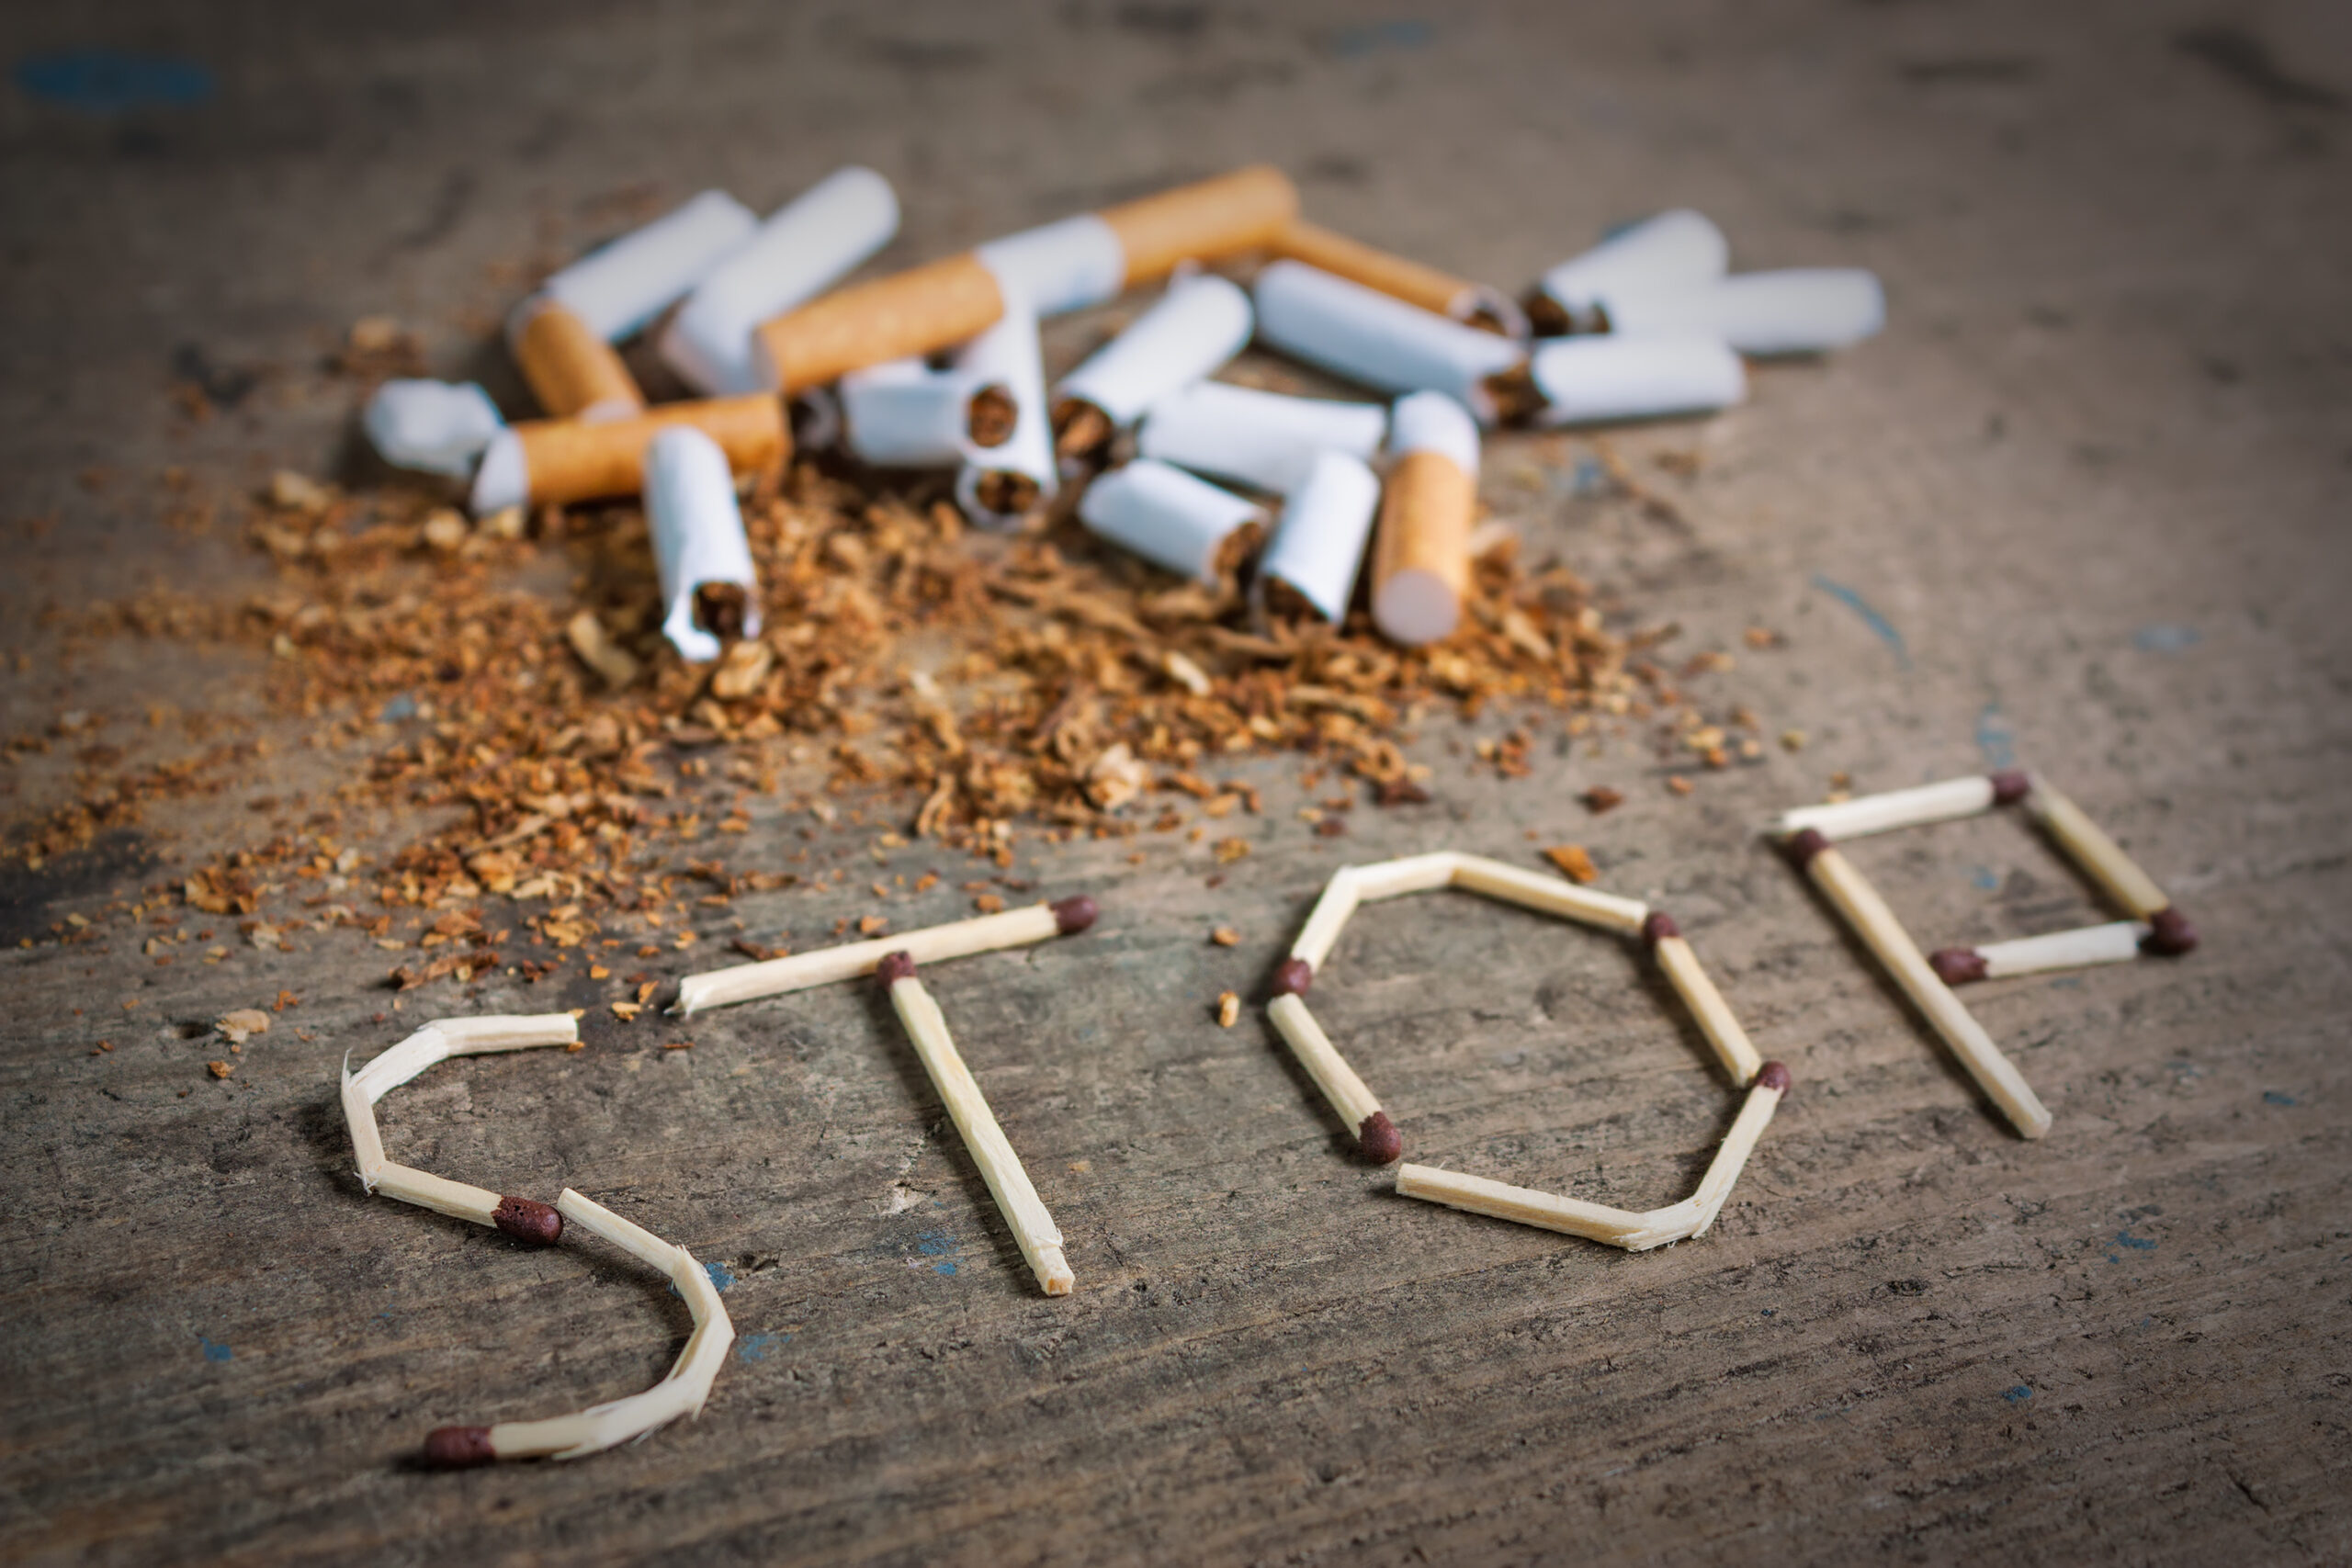 Quitting Smoking By 35 May Mitigate Some Of The Health Risks